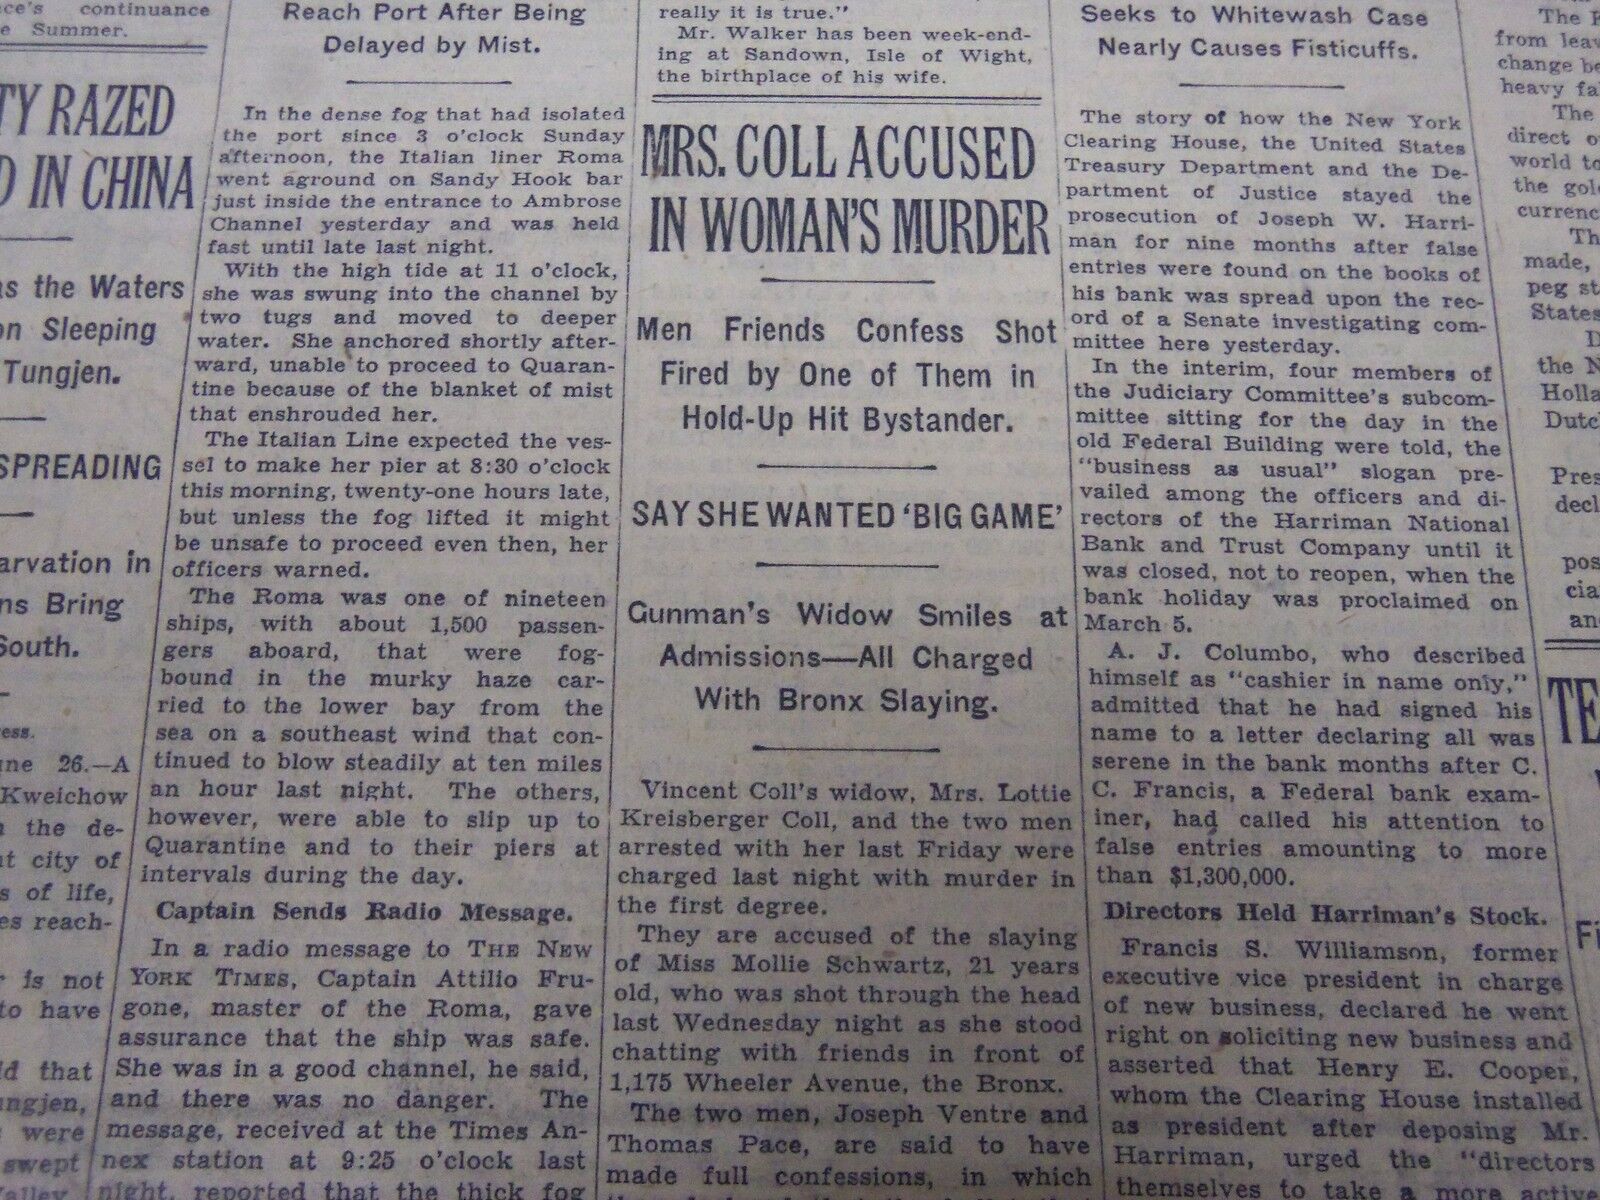 1933 JUNE 27 NEW YORK TIMES - MRS. COLL ACCUSED IN WOMAN'S MURDER - NT 5247